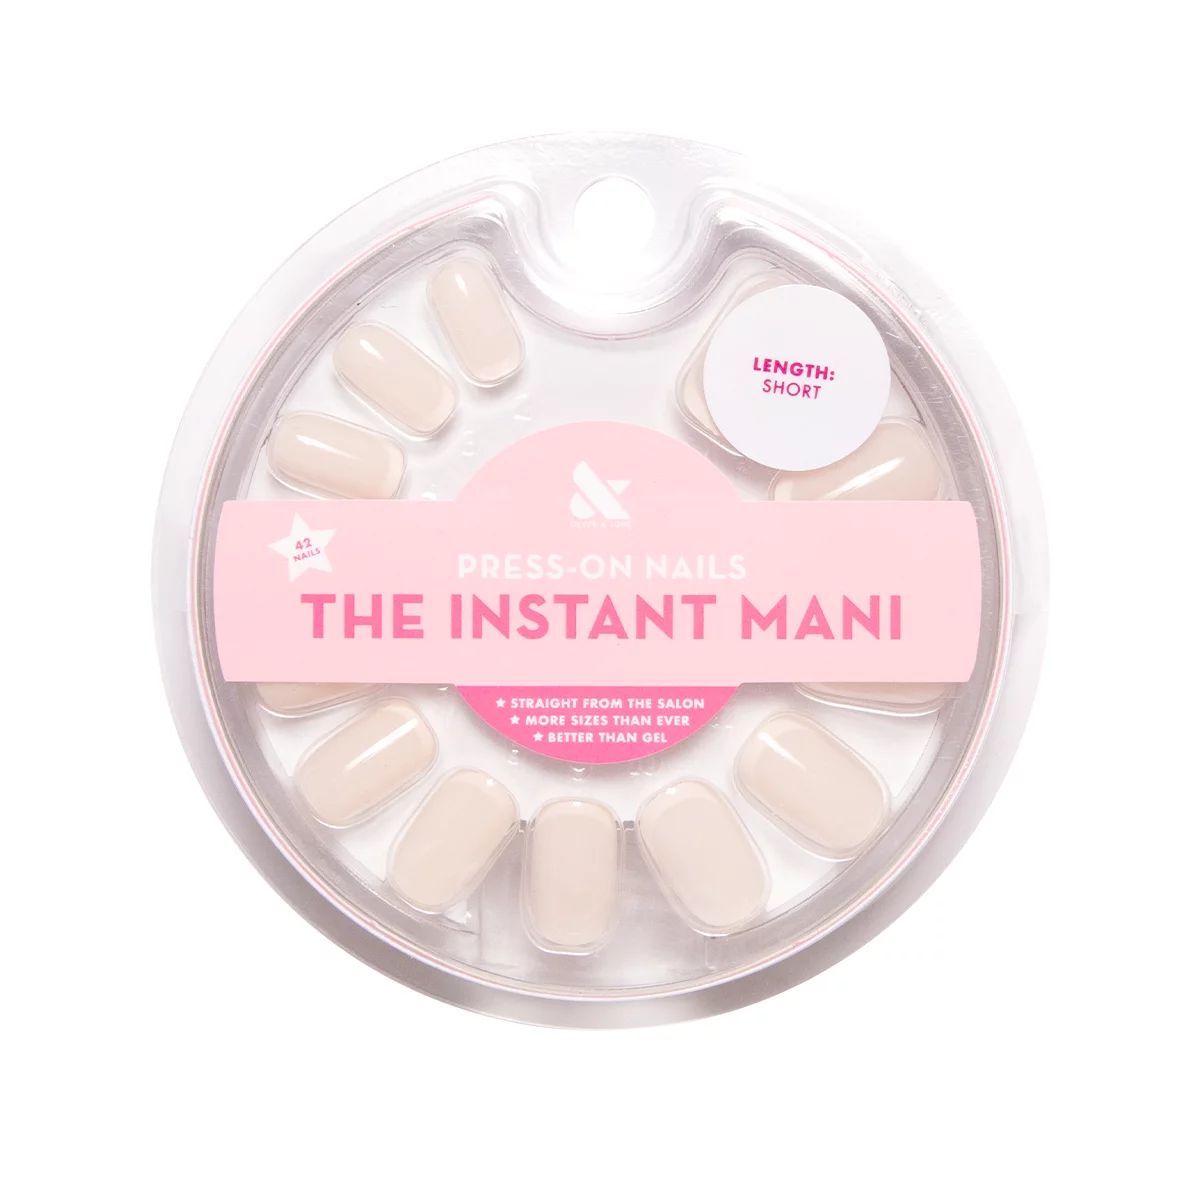 Olive & June Instant Mani Squoval Short Press-On Nails, Pink, Classic French, 42 Pieces | Walmart (US)